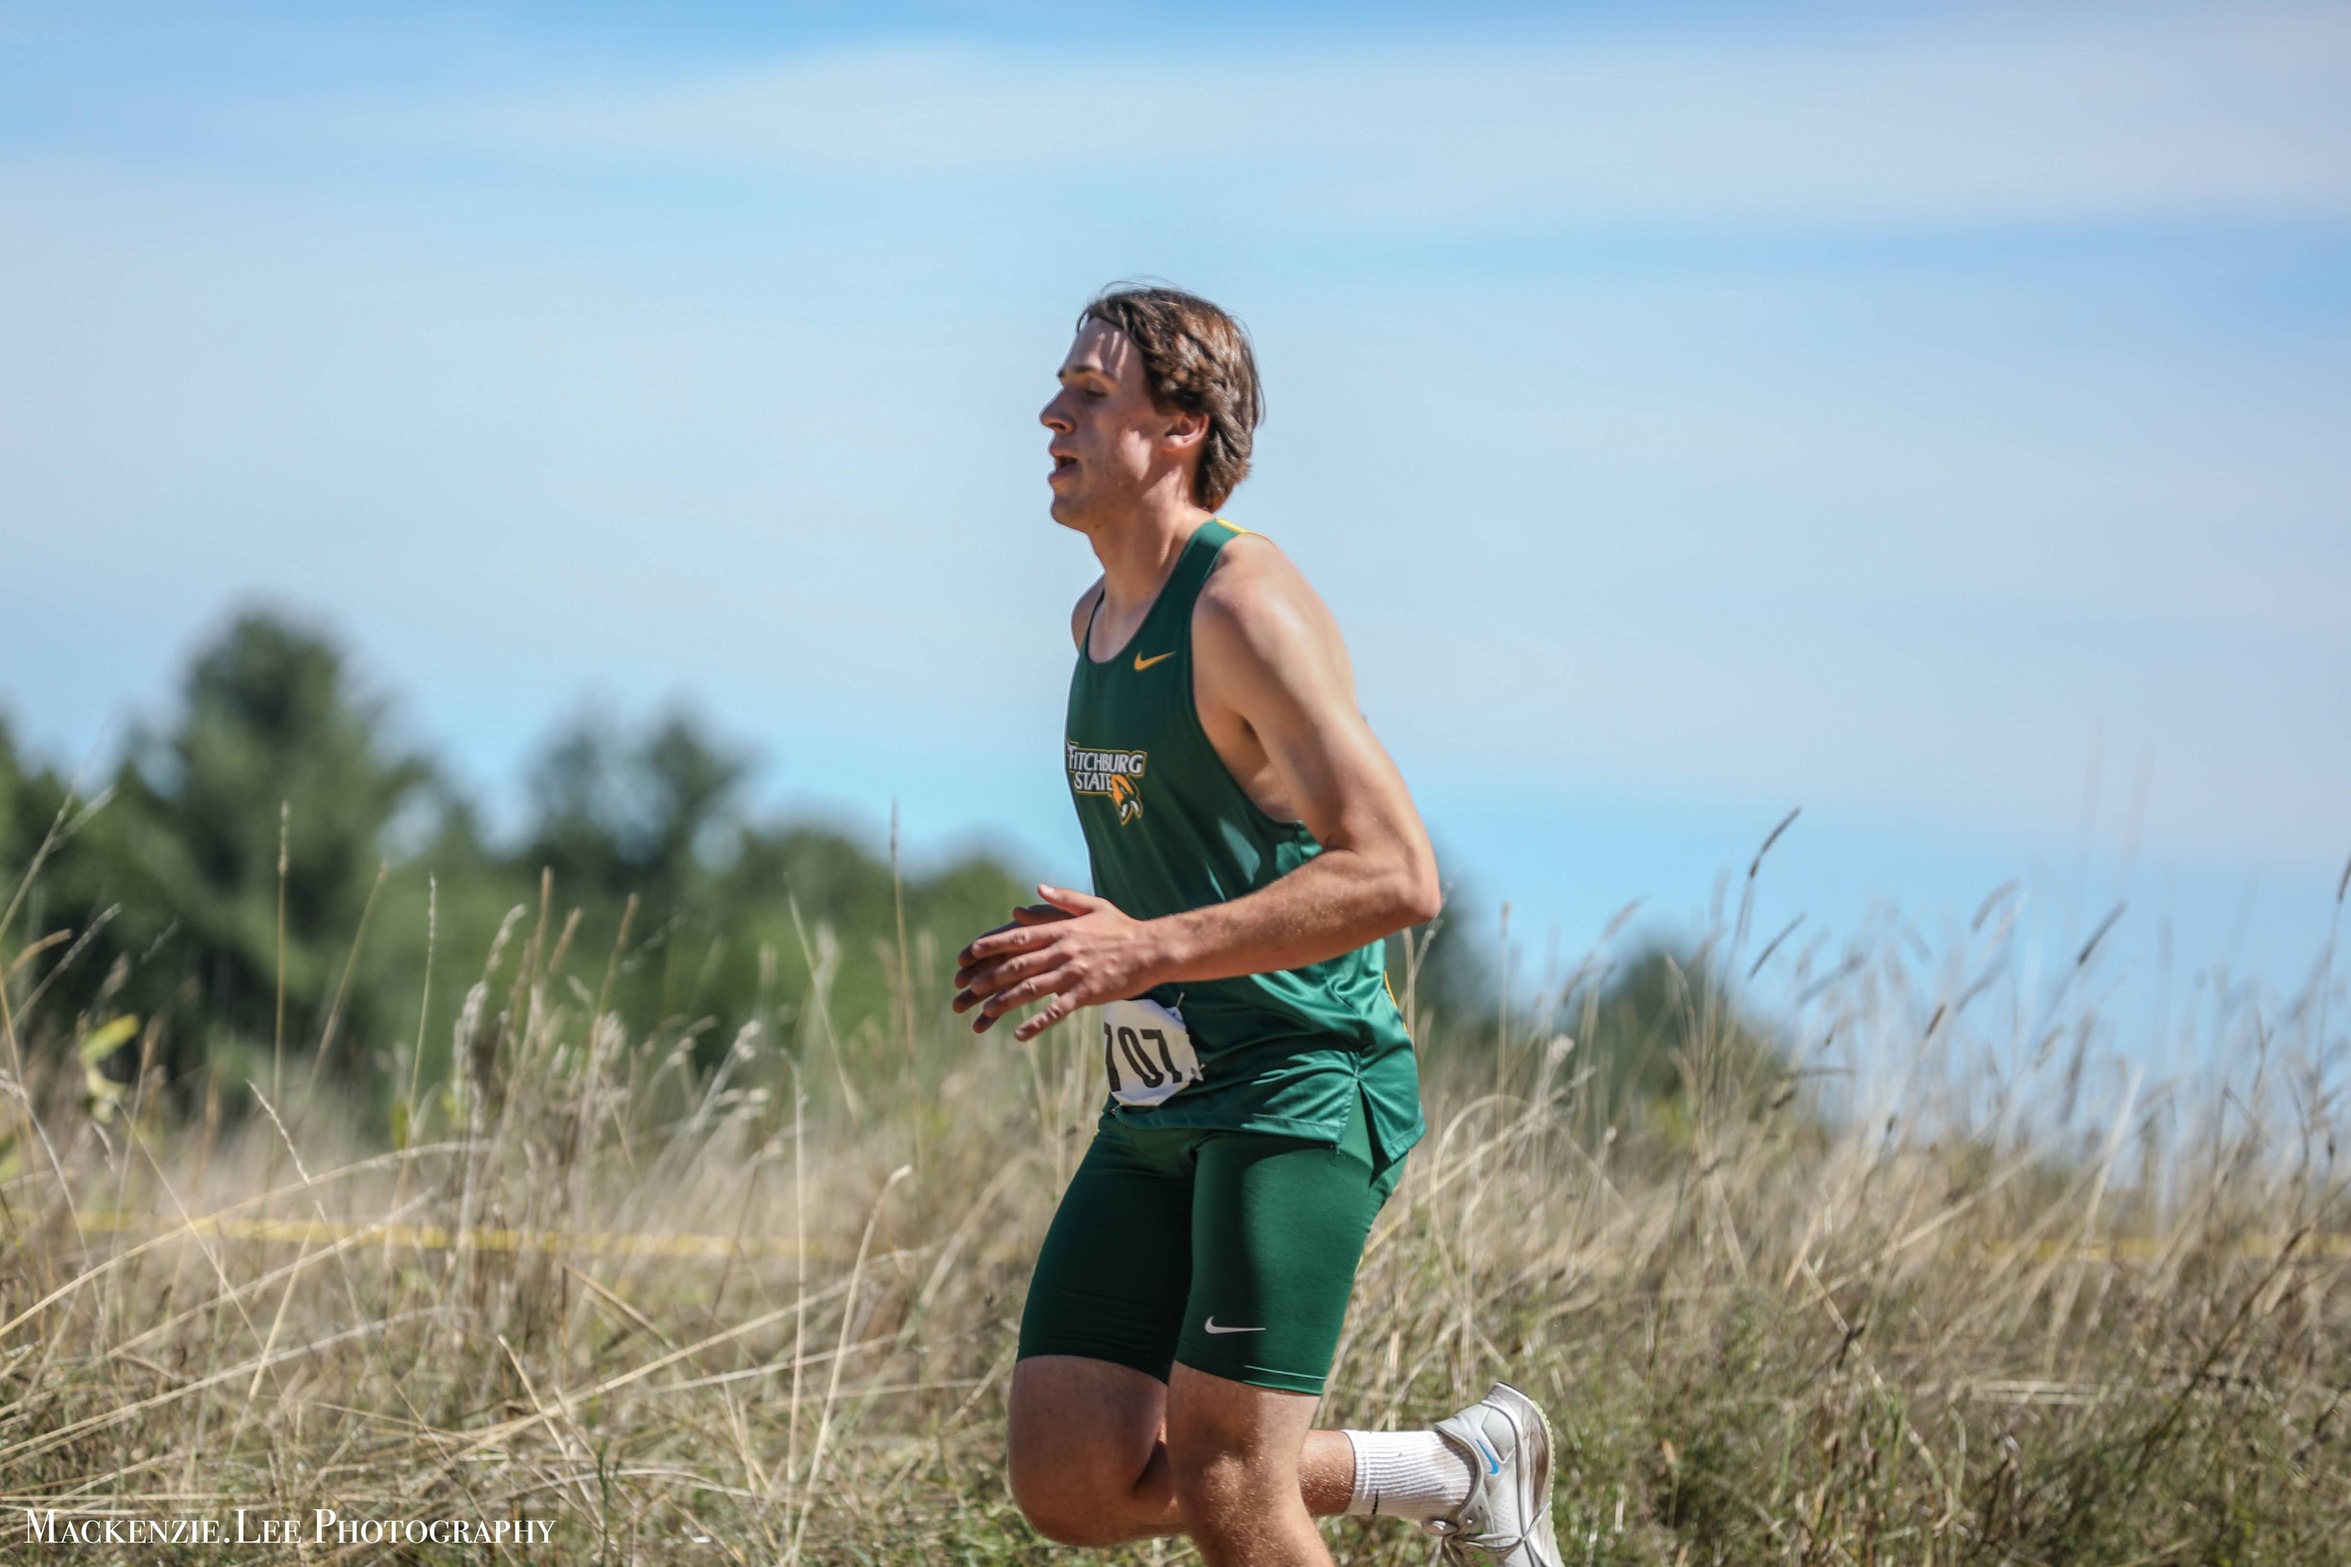 Falcons Place Second Overall At Jim Sheehan Invite